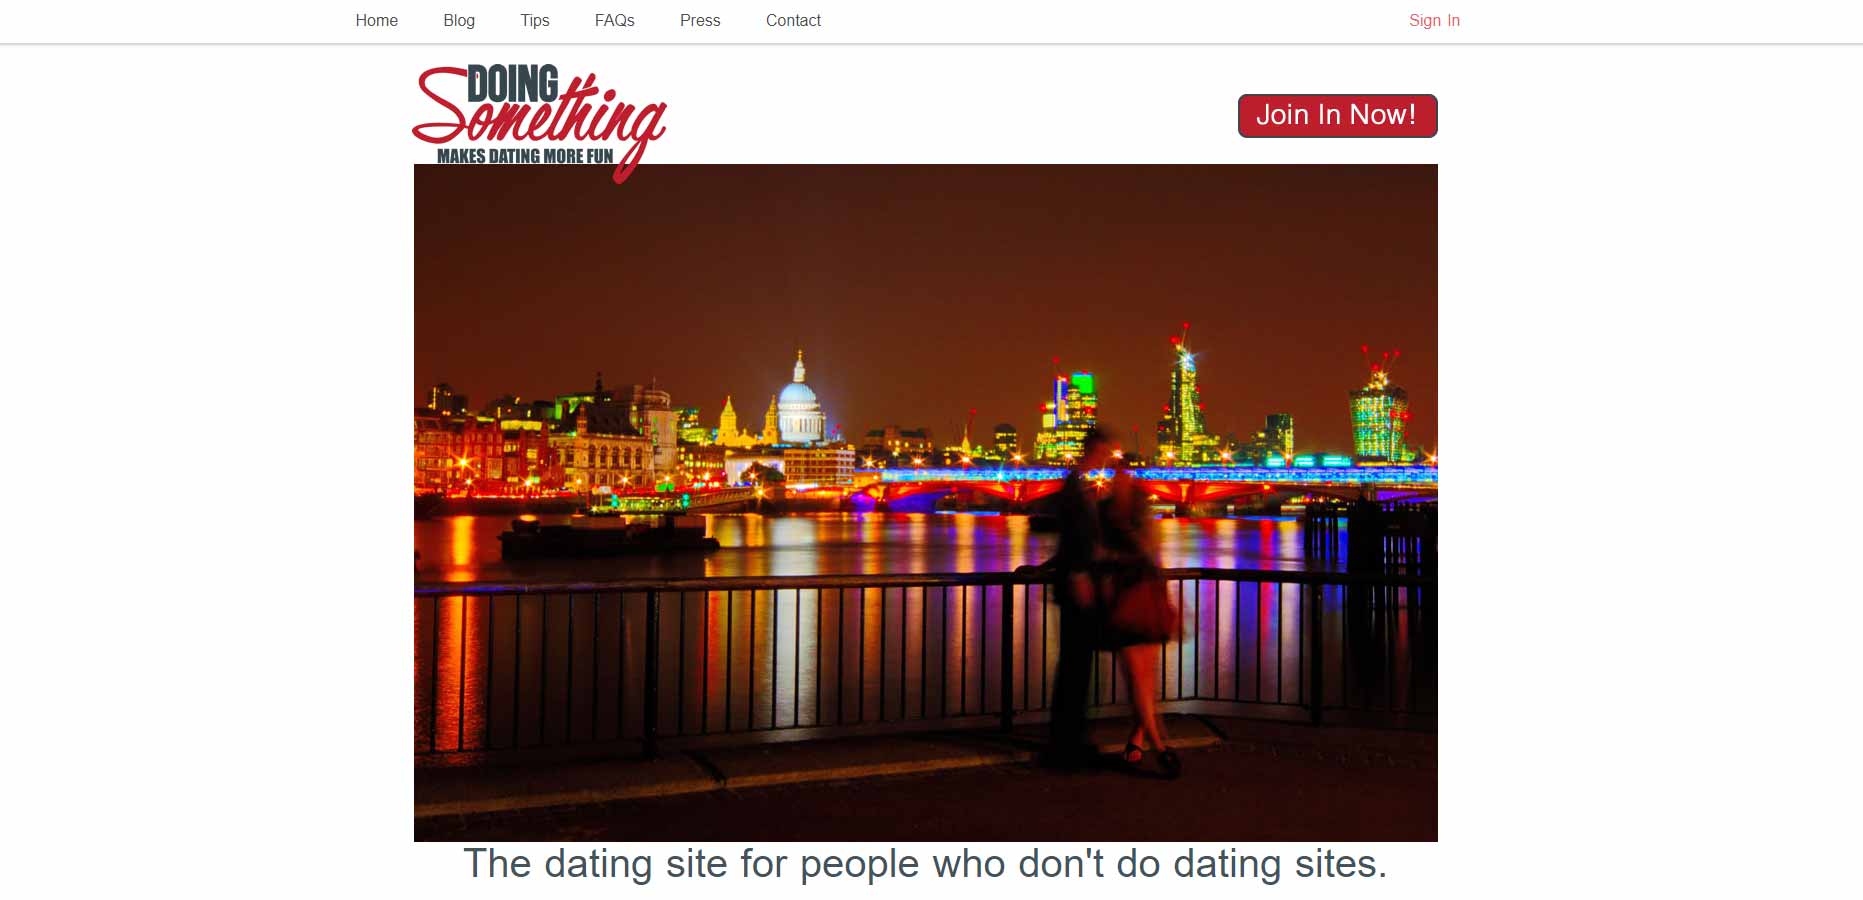 Doing Something home page image for international dating site review